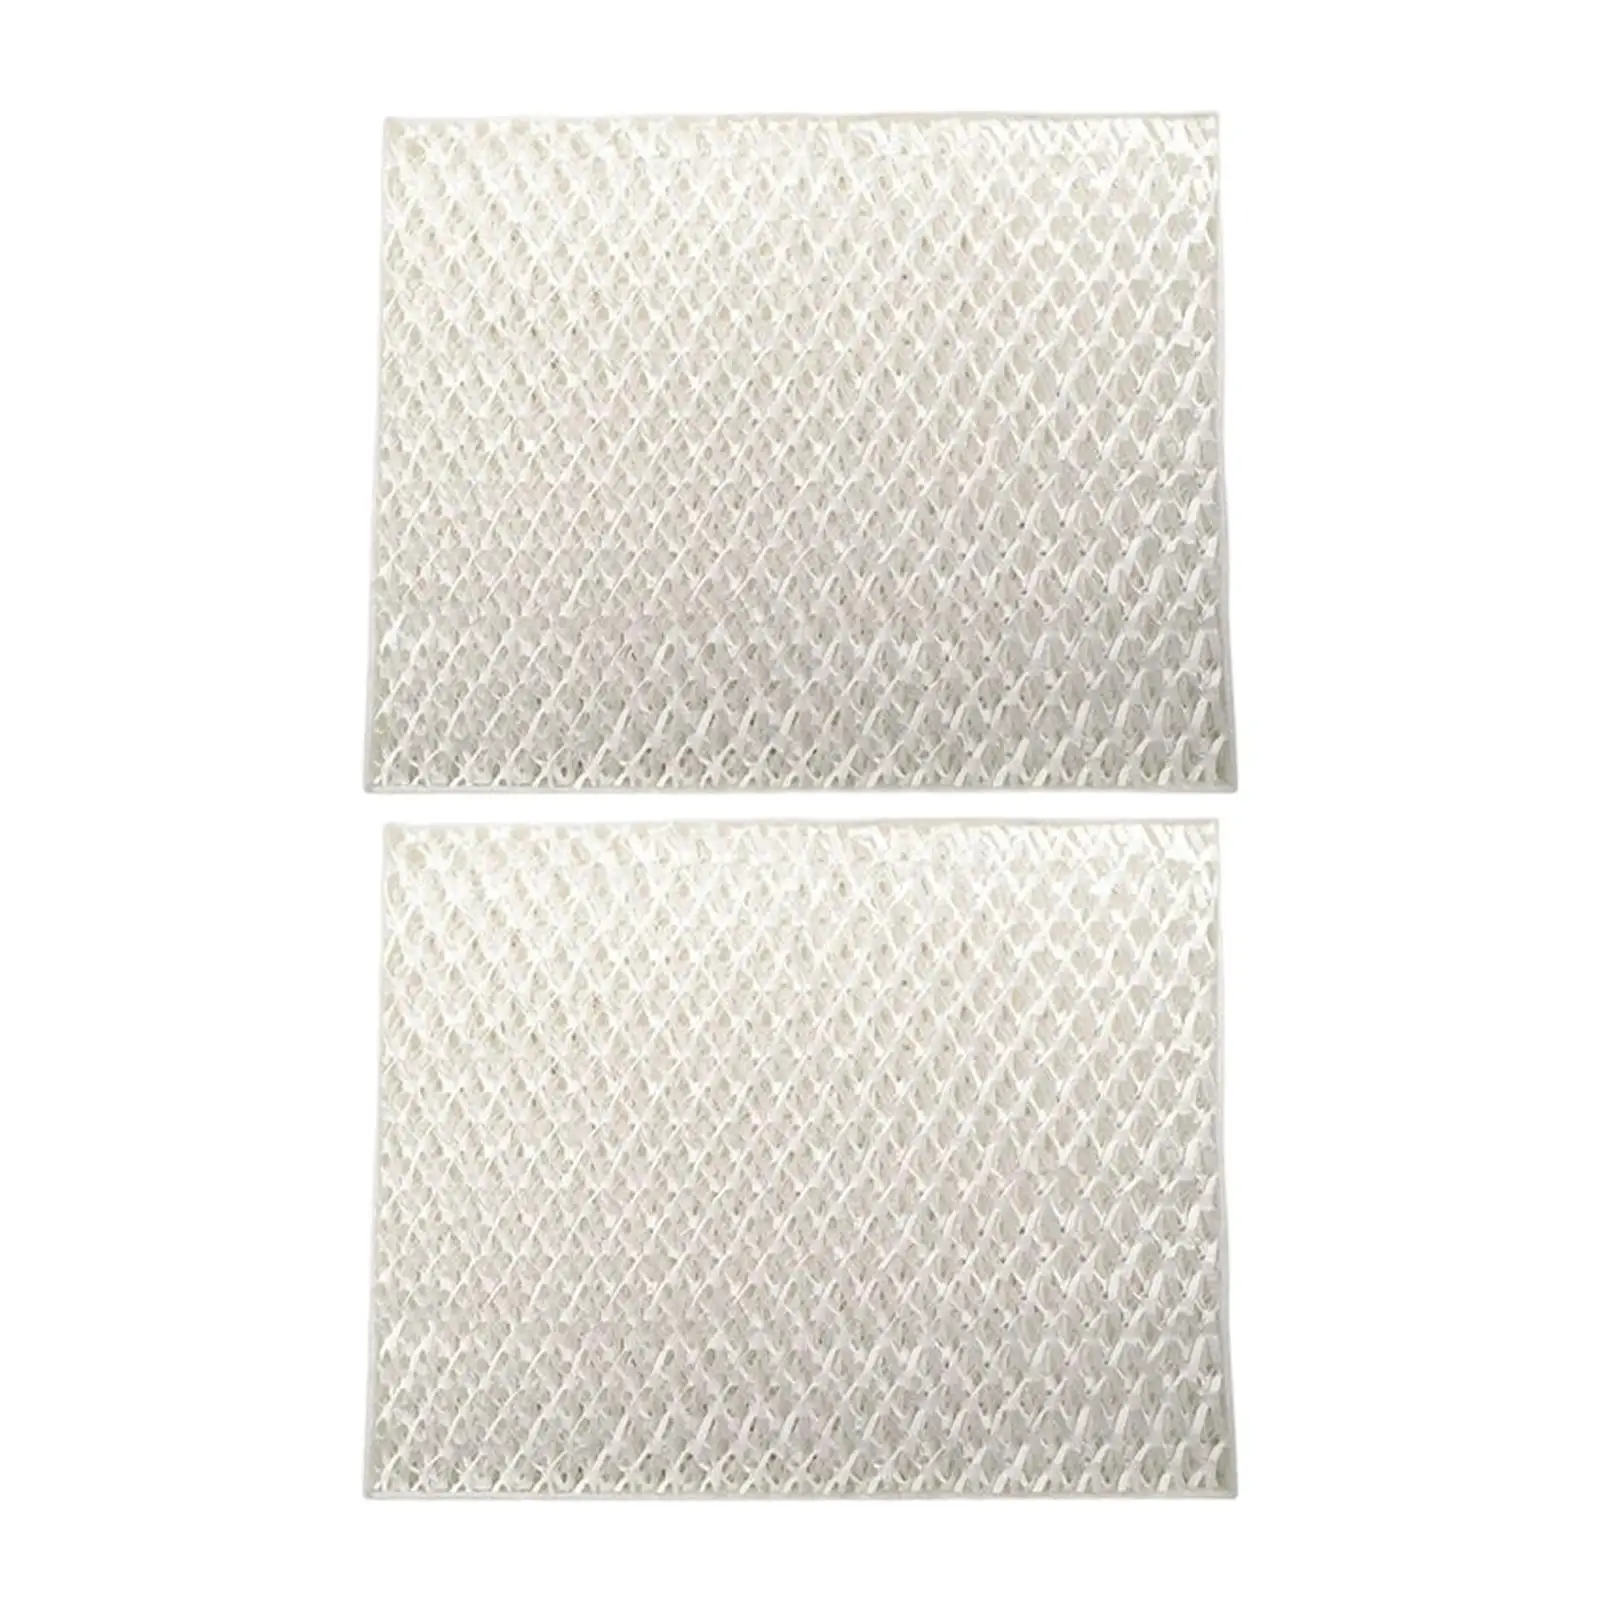 Humidifier Filter Humidifier Wick Filters for HWF62 Humidifier Professional